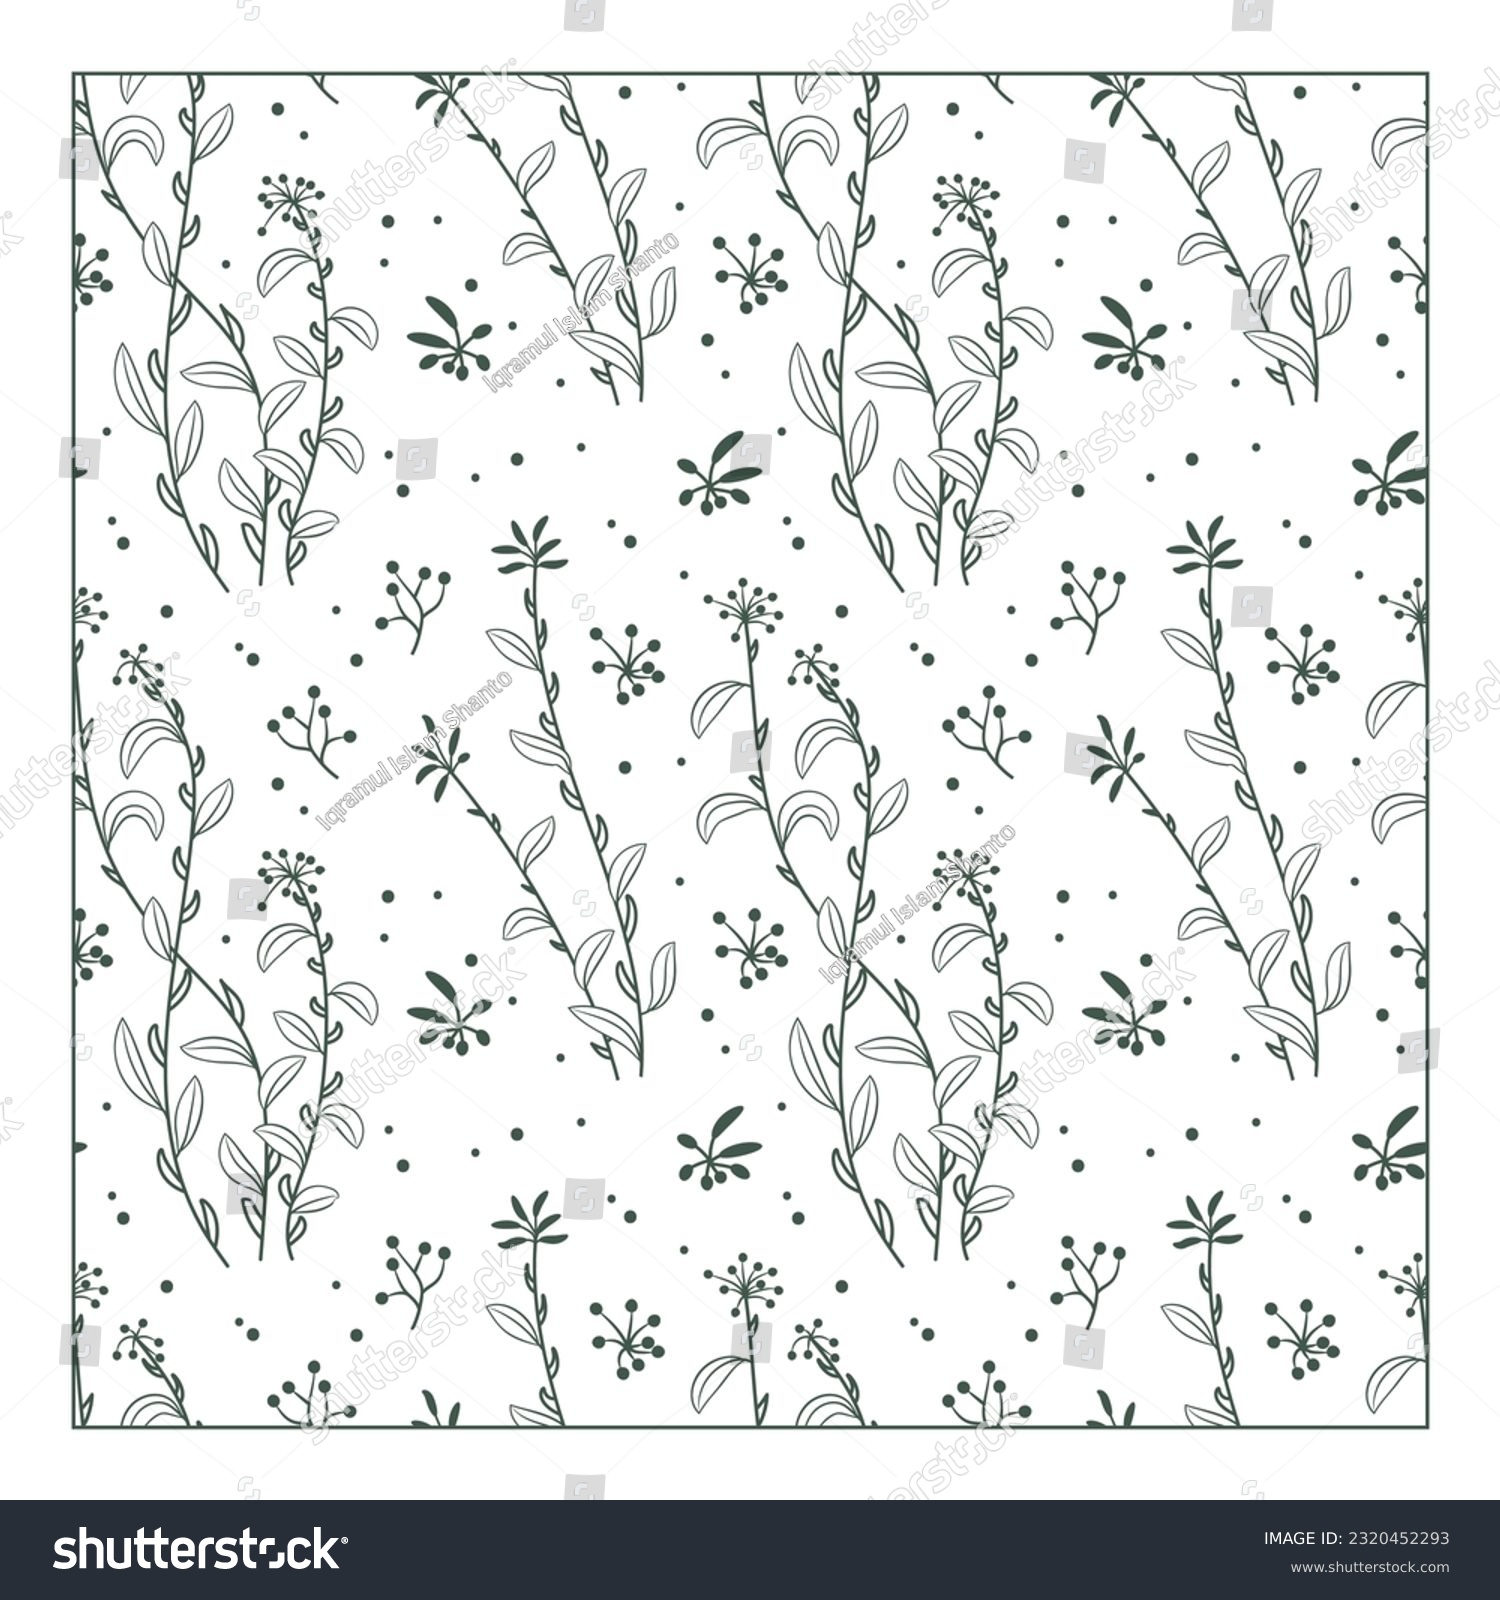 SVG of Wild Flower Doodle Art Pattern Sets, Unleash your creativity with these mesmerizing wild flower doodle art pattern sets. Create stunning backgrounds, prints, and crafts with these floral patterns. svg